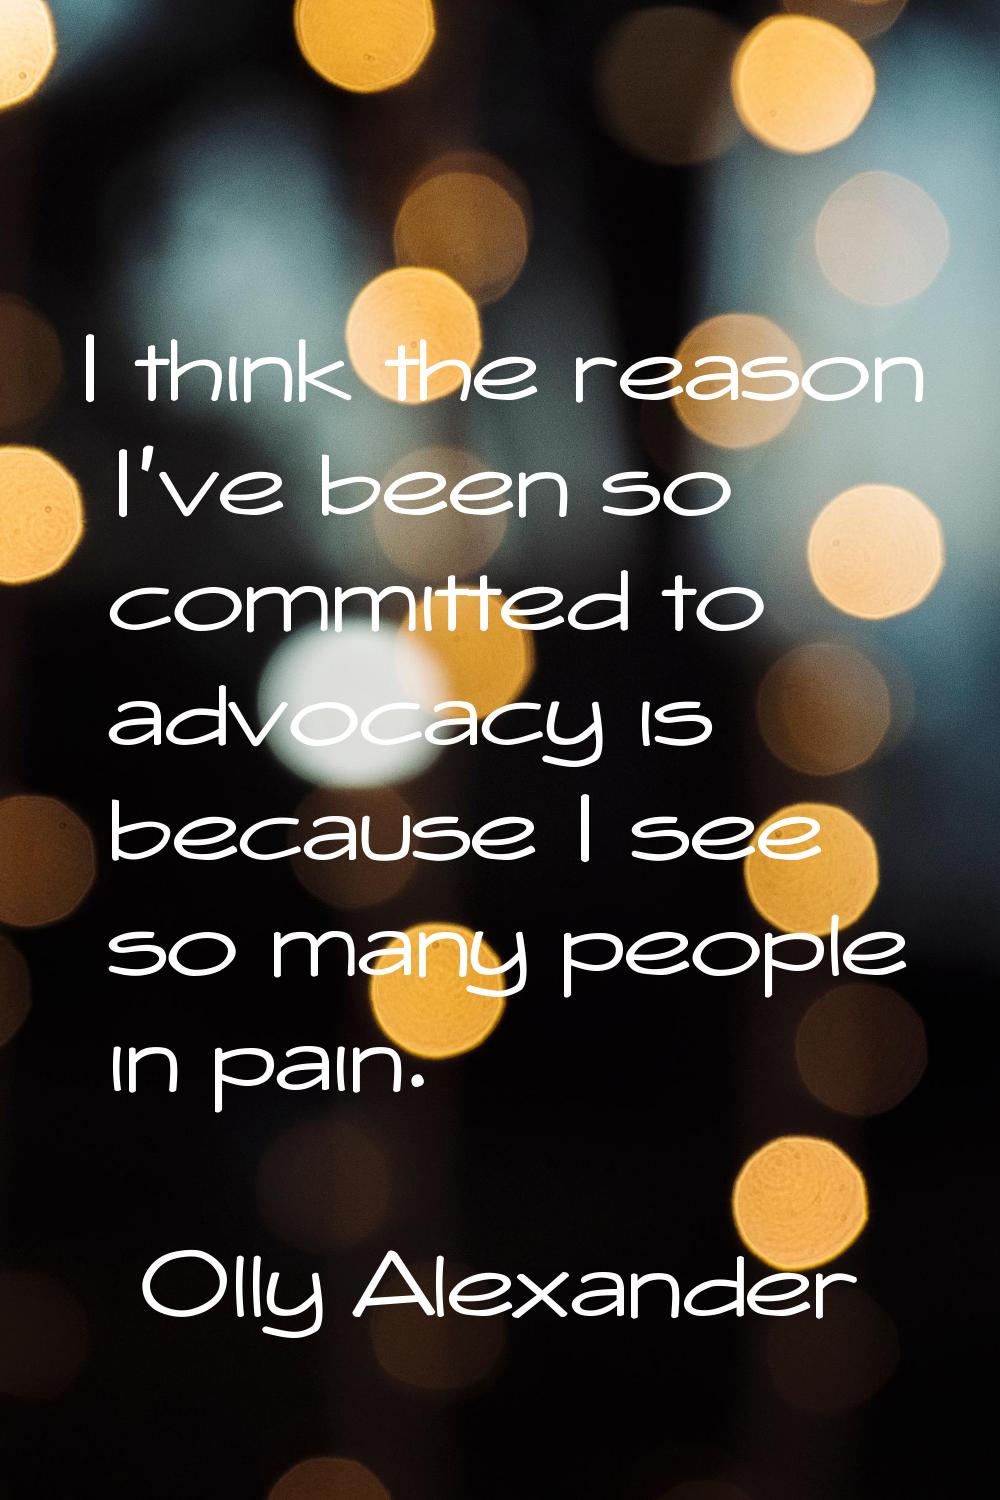 I think the reason I've been so committed to advocacy is because I see so many people in pain.